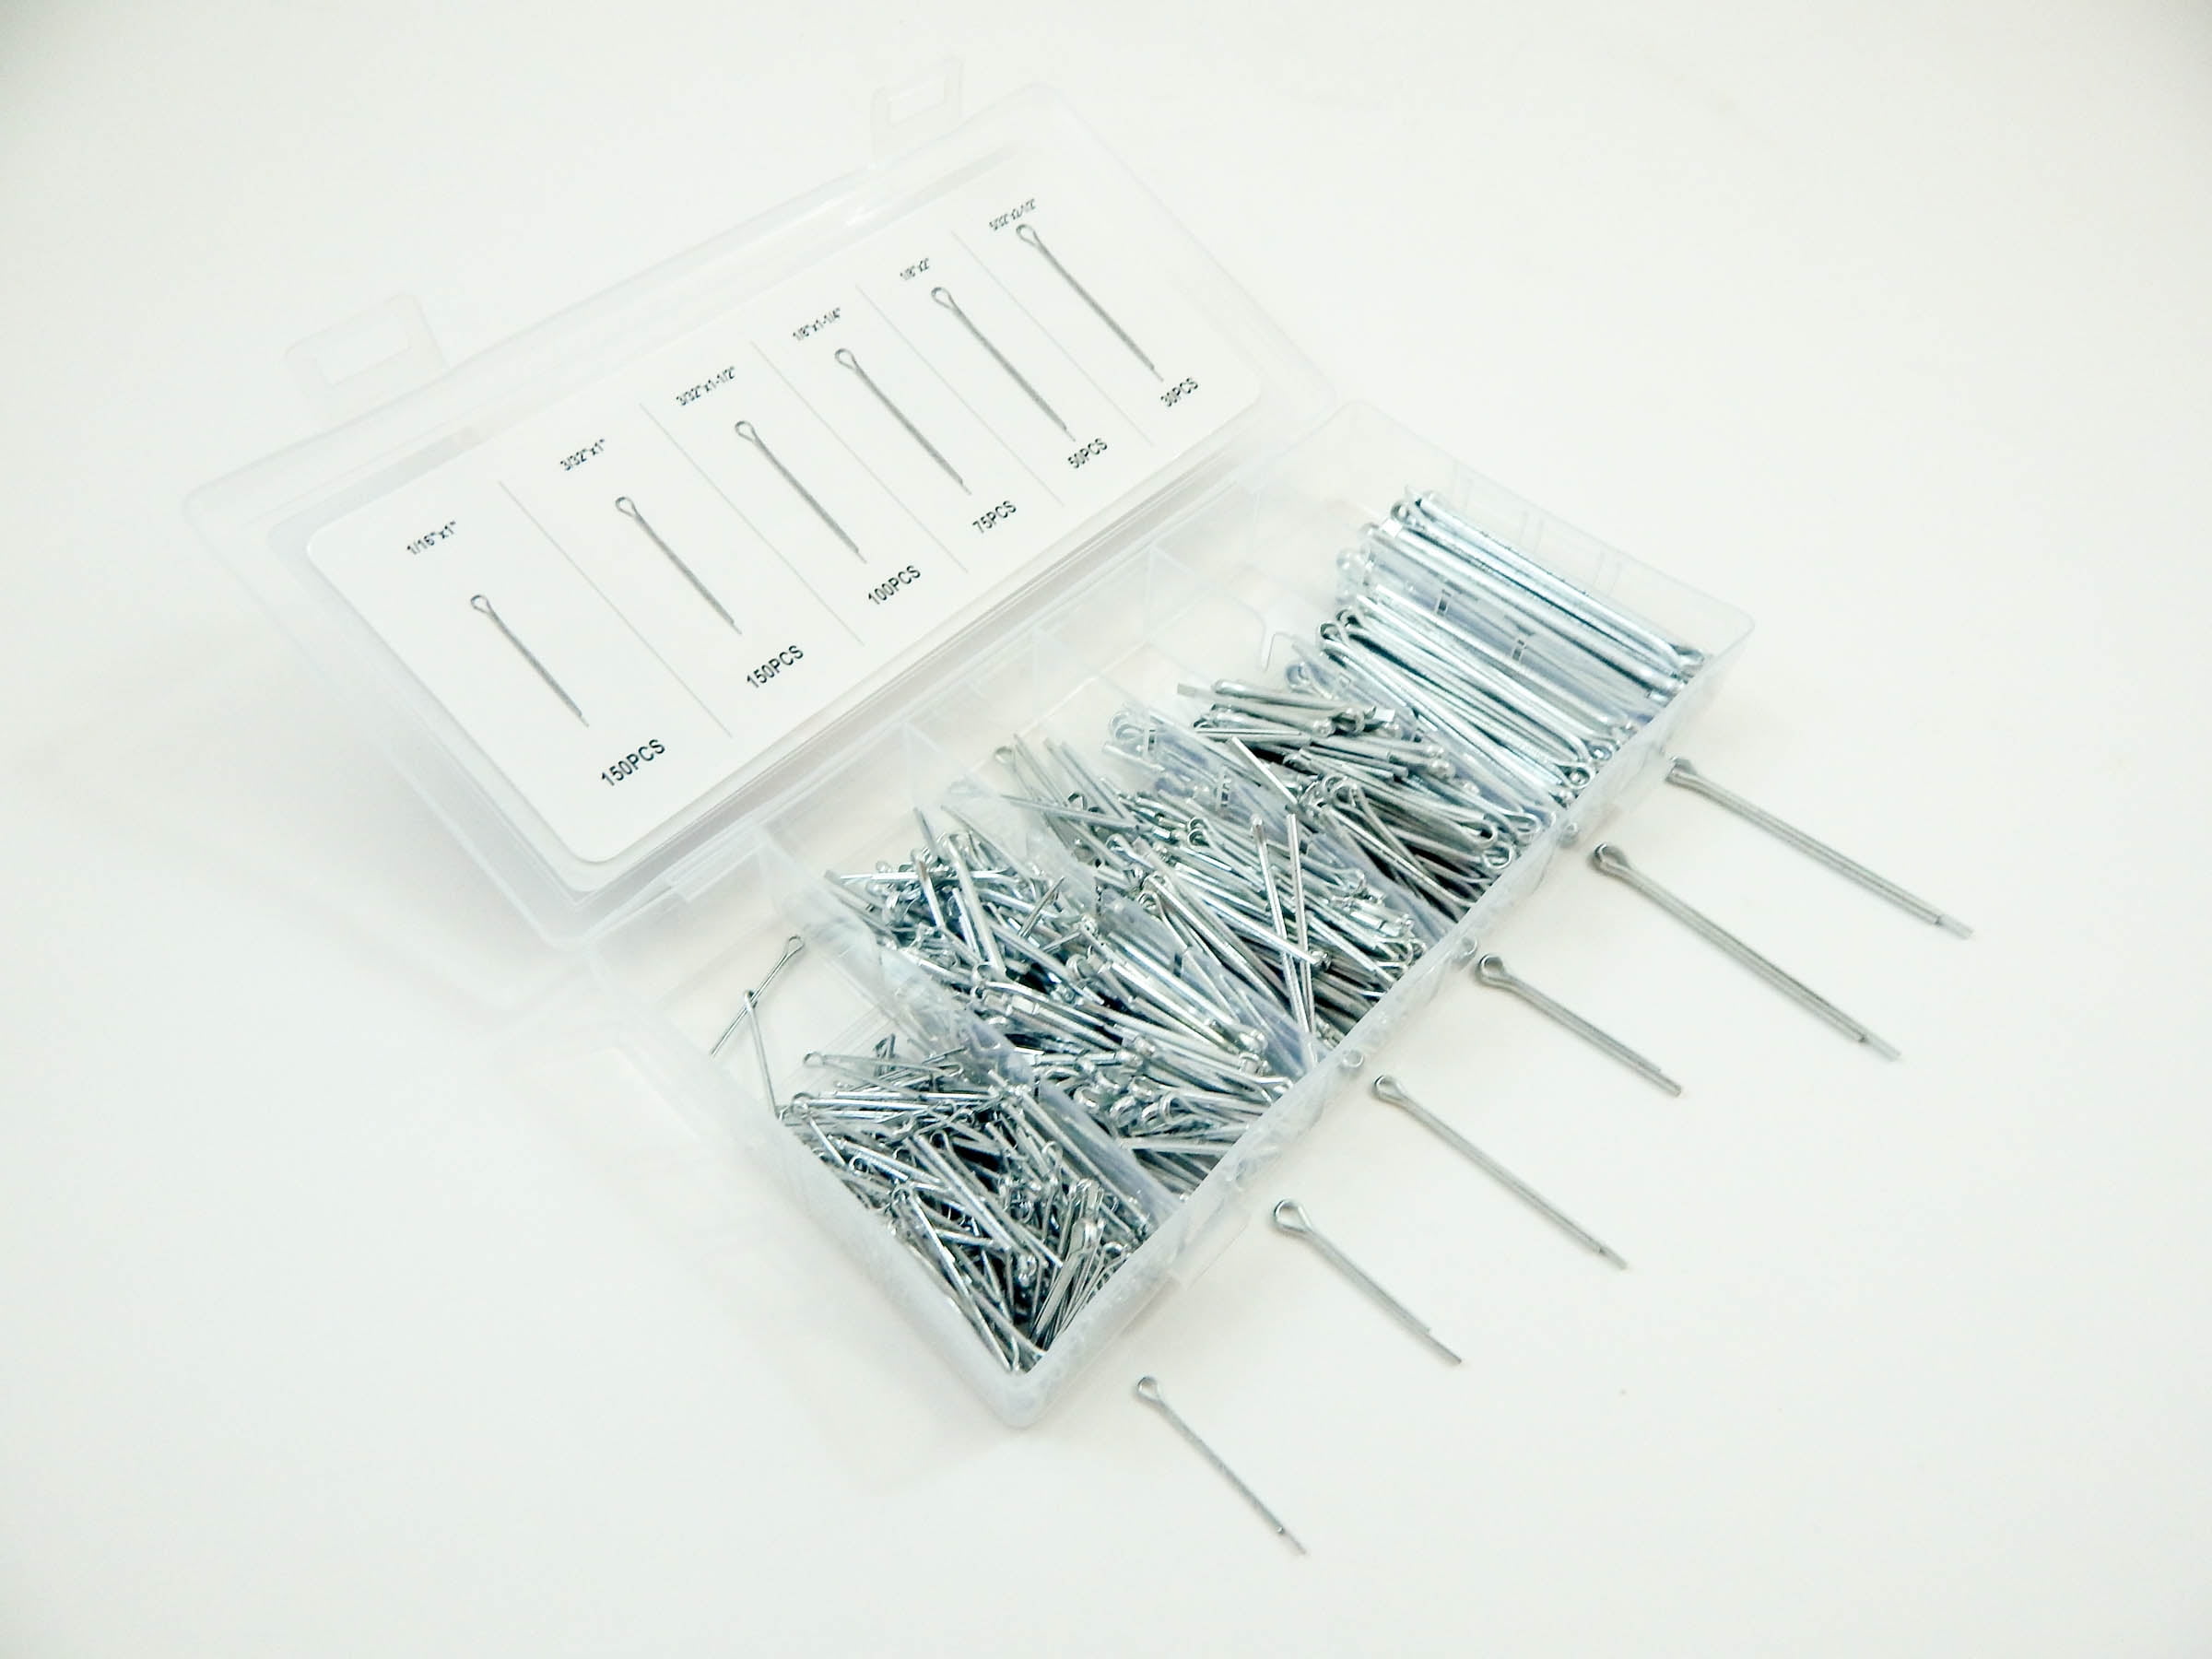 555pc Cotter Pin Assortment Kit Case Clip Key Fastner Fitting Small Medium Large for sale online 